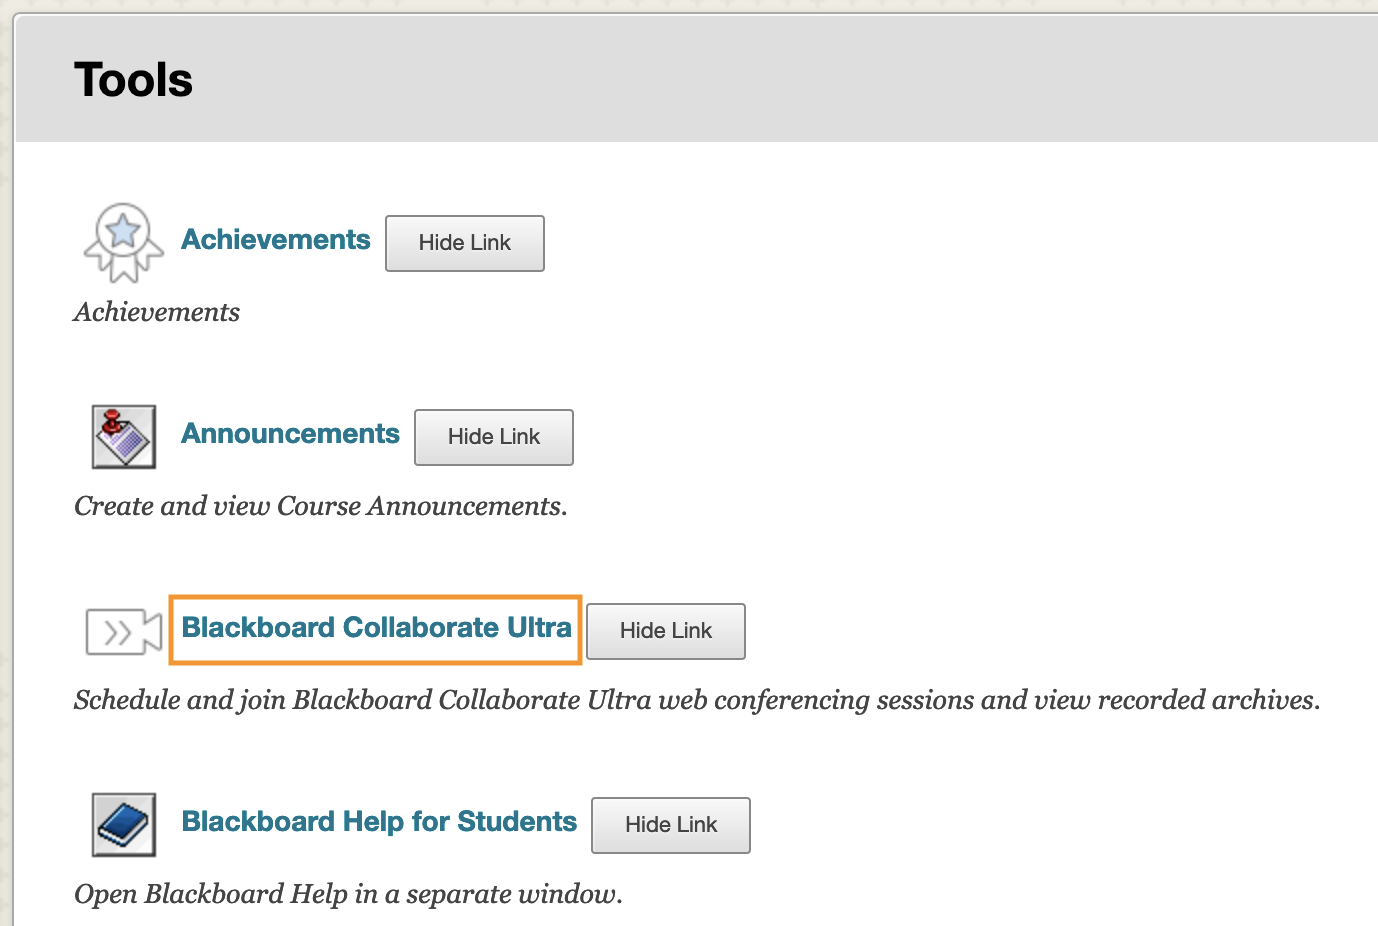 Tools page. Blackboard Collaborate Ultra is highlighted.